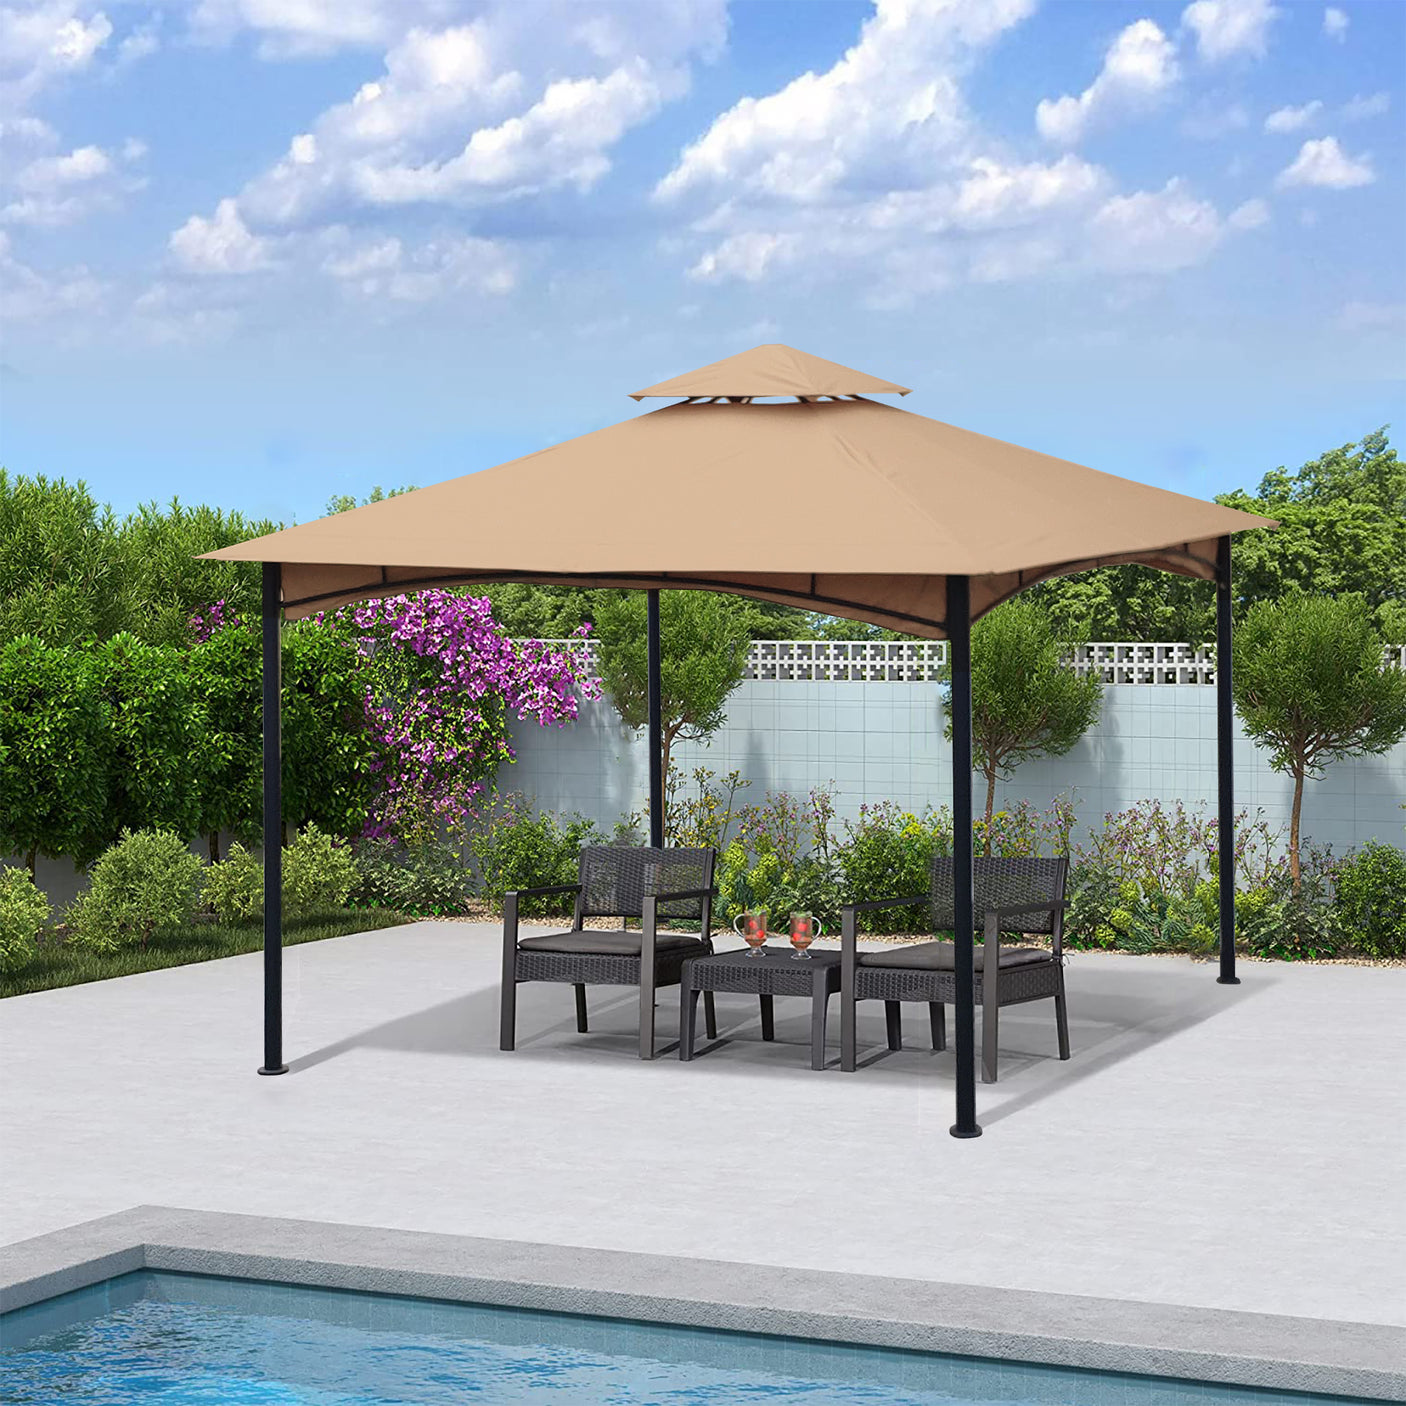 11x11 Ft Outdoor Patio Square Steel Gazebo Canopy With Double Roof For Lawn, Garden, Backyard